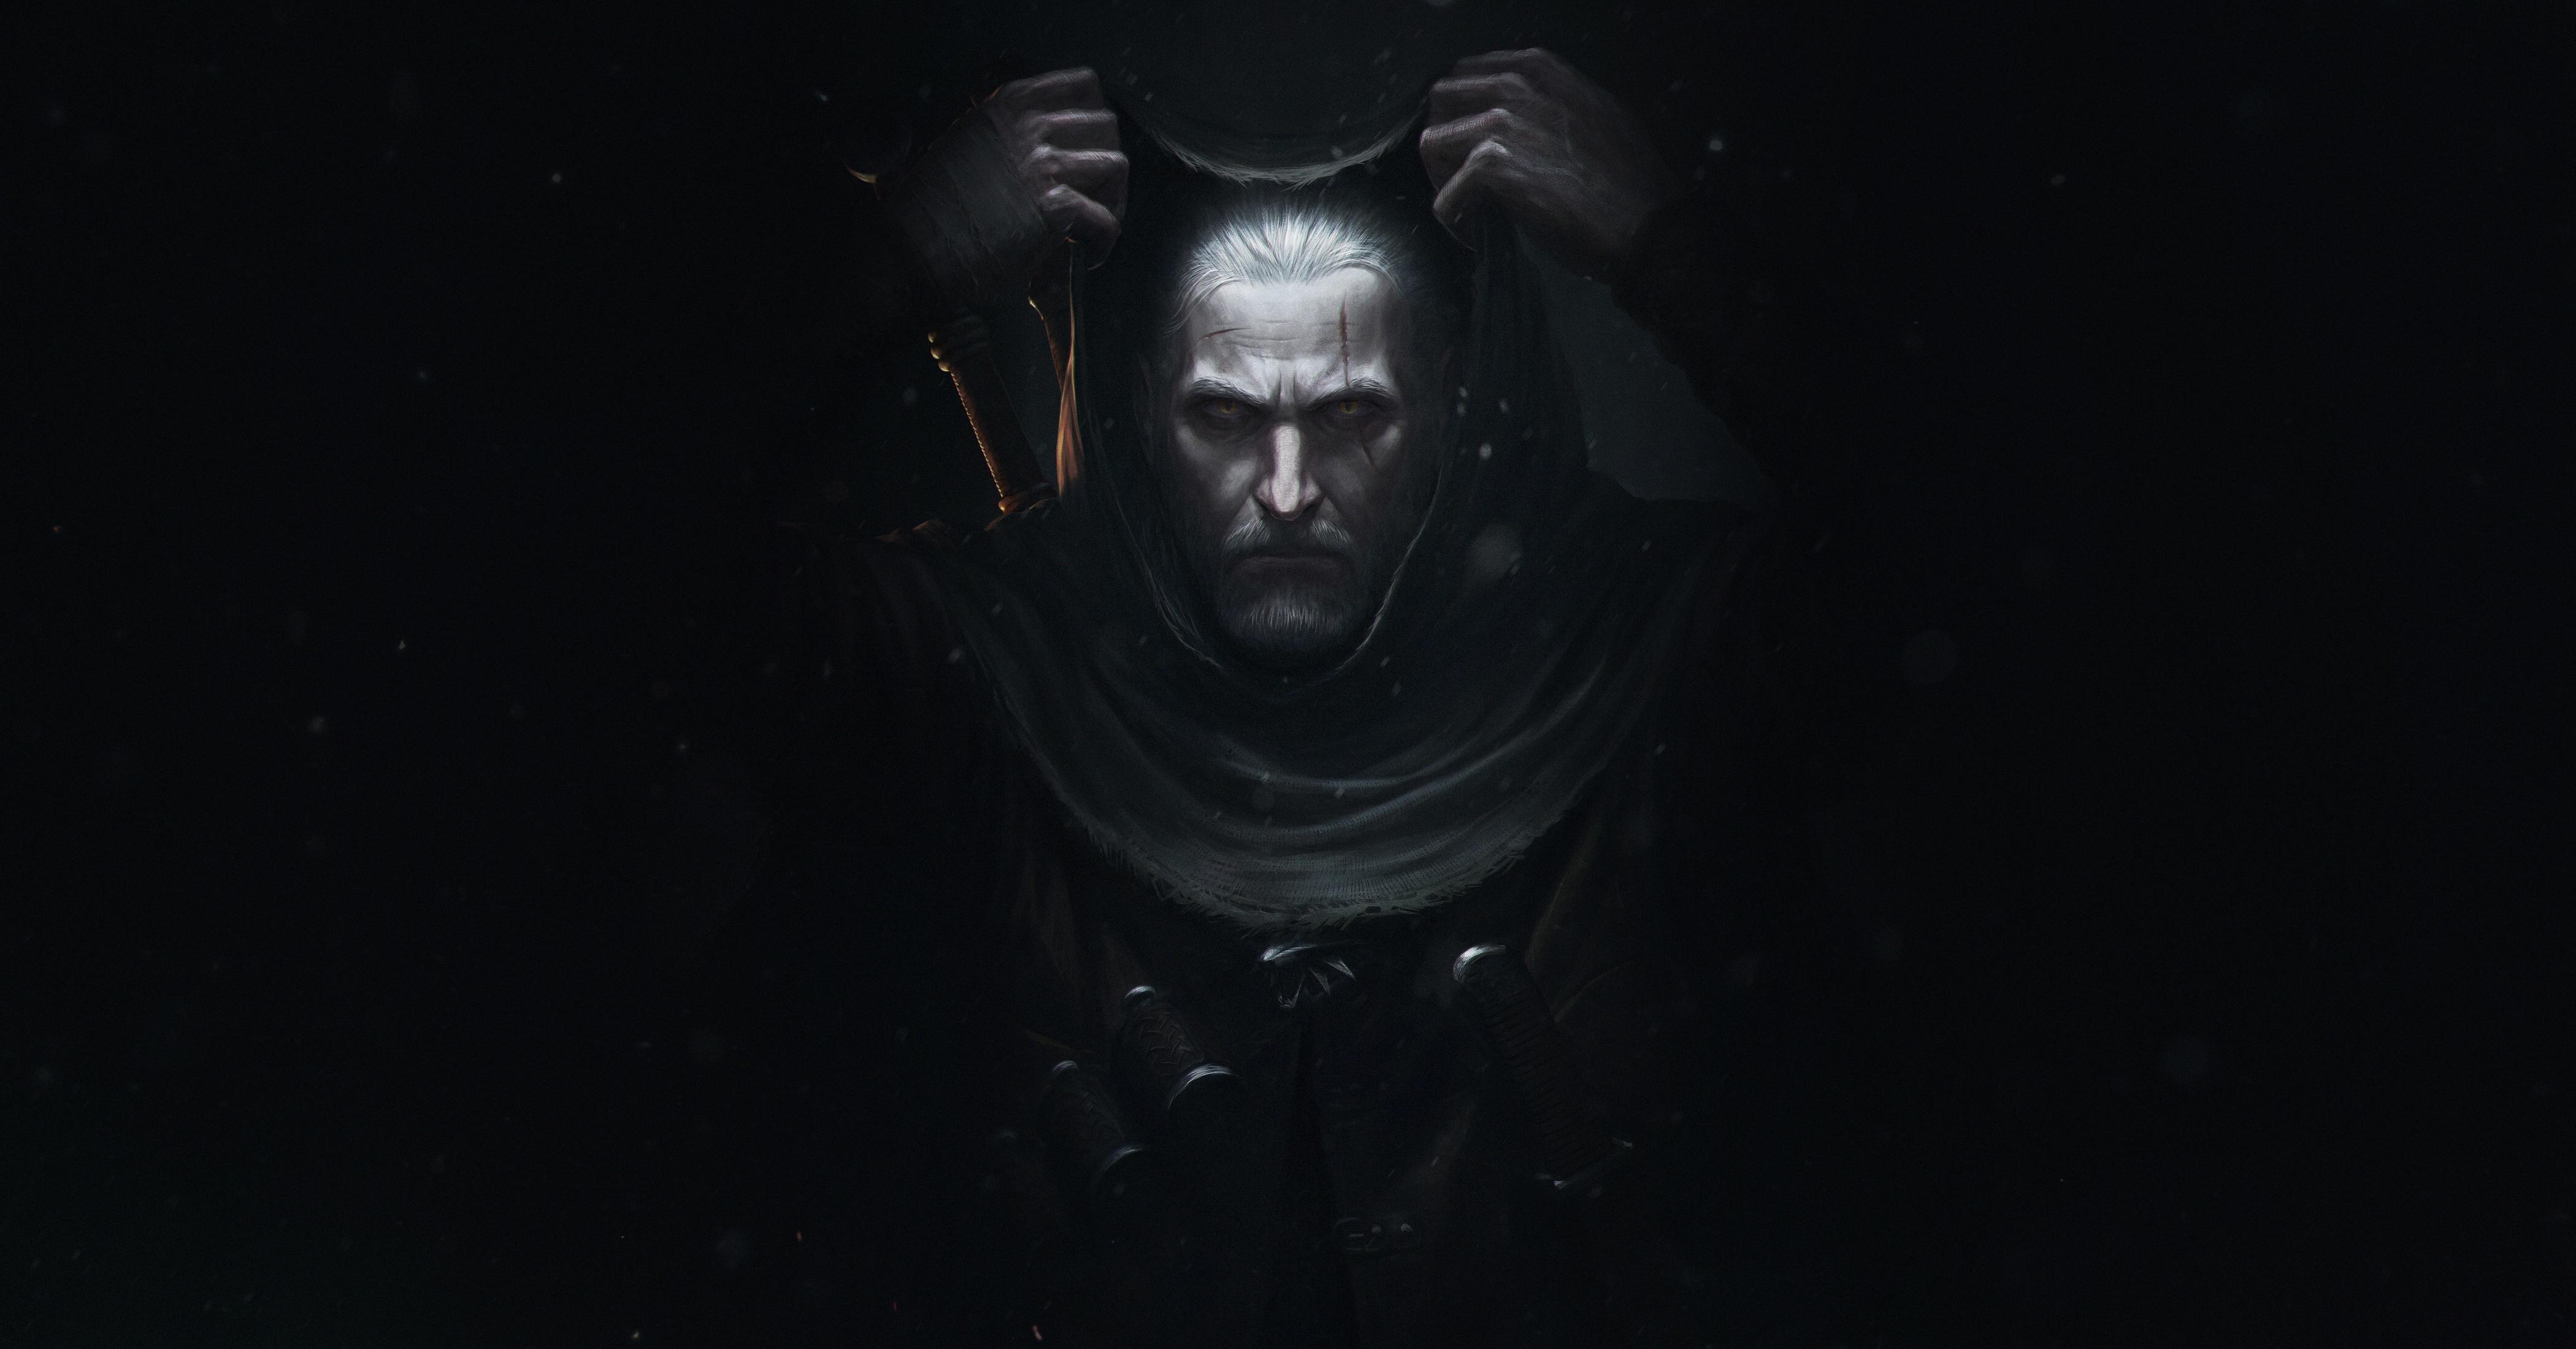 The Witcher 3 Wild Hunt Poster Wallpaper, HD Games 4K Wallpapers